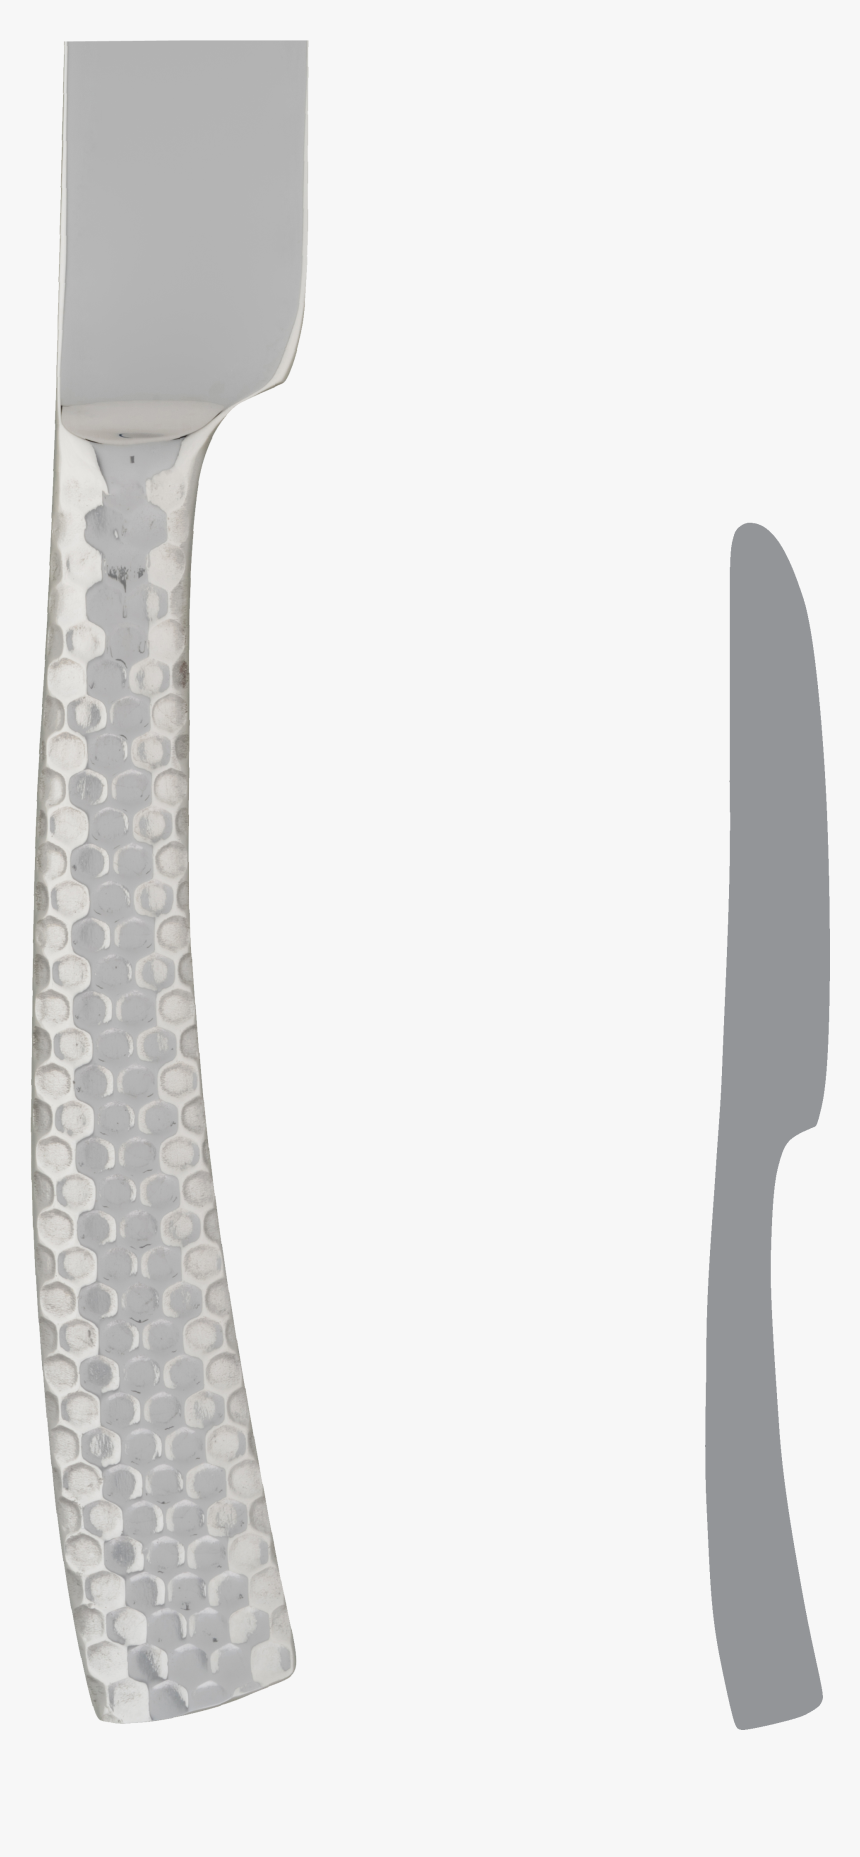 Monarch, Butter Knife - Blade, HD Png Download, Free Download